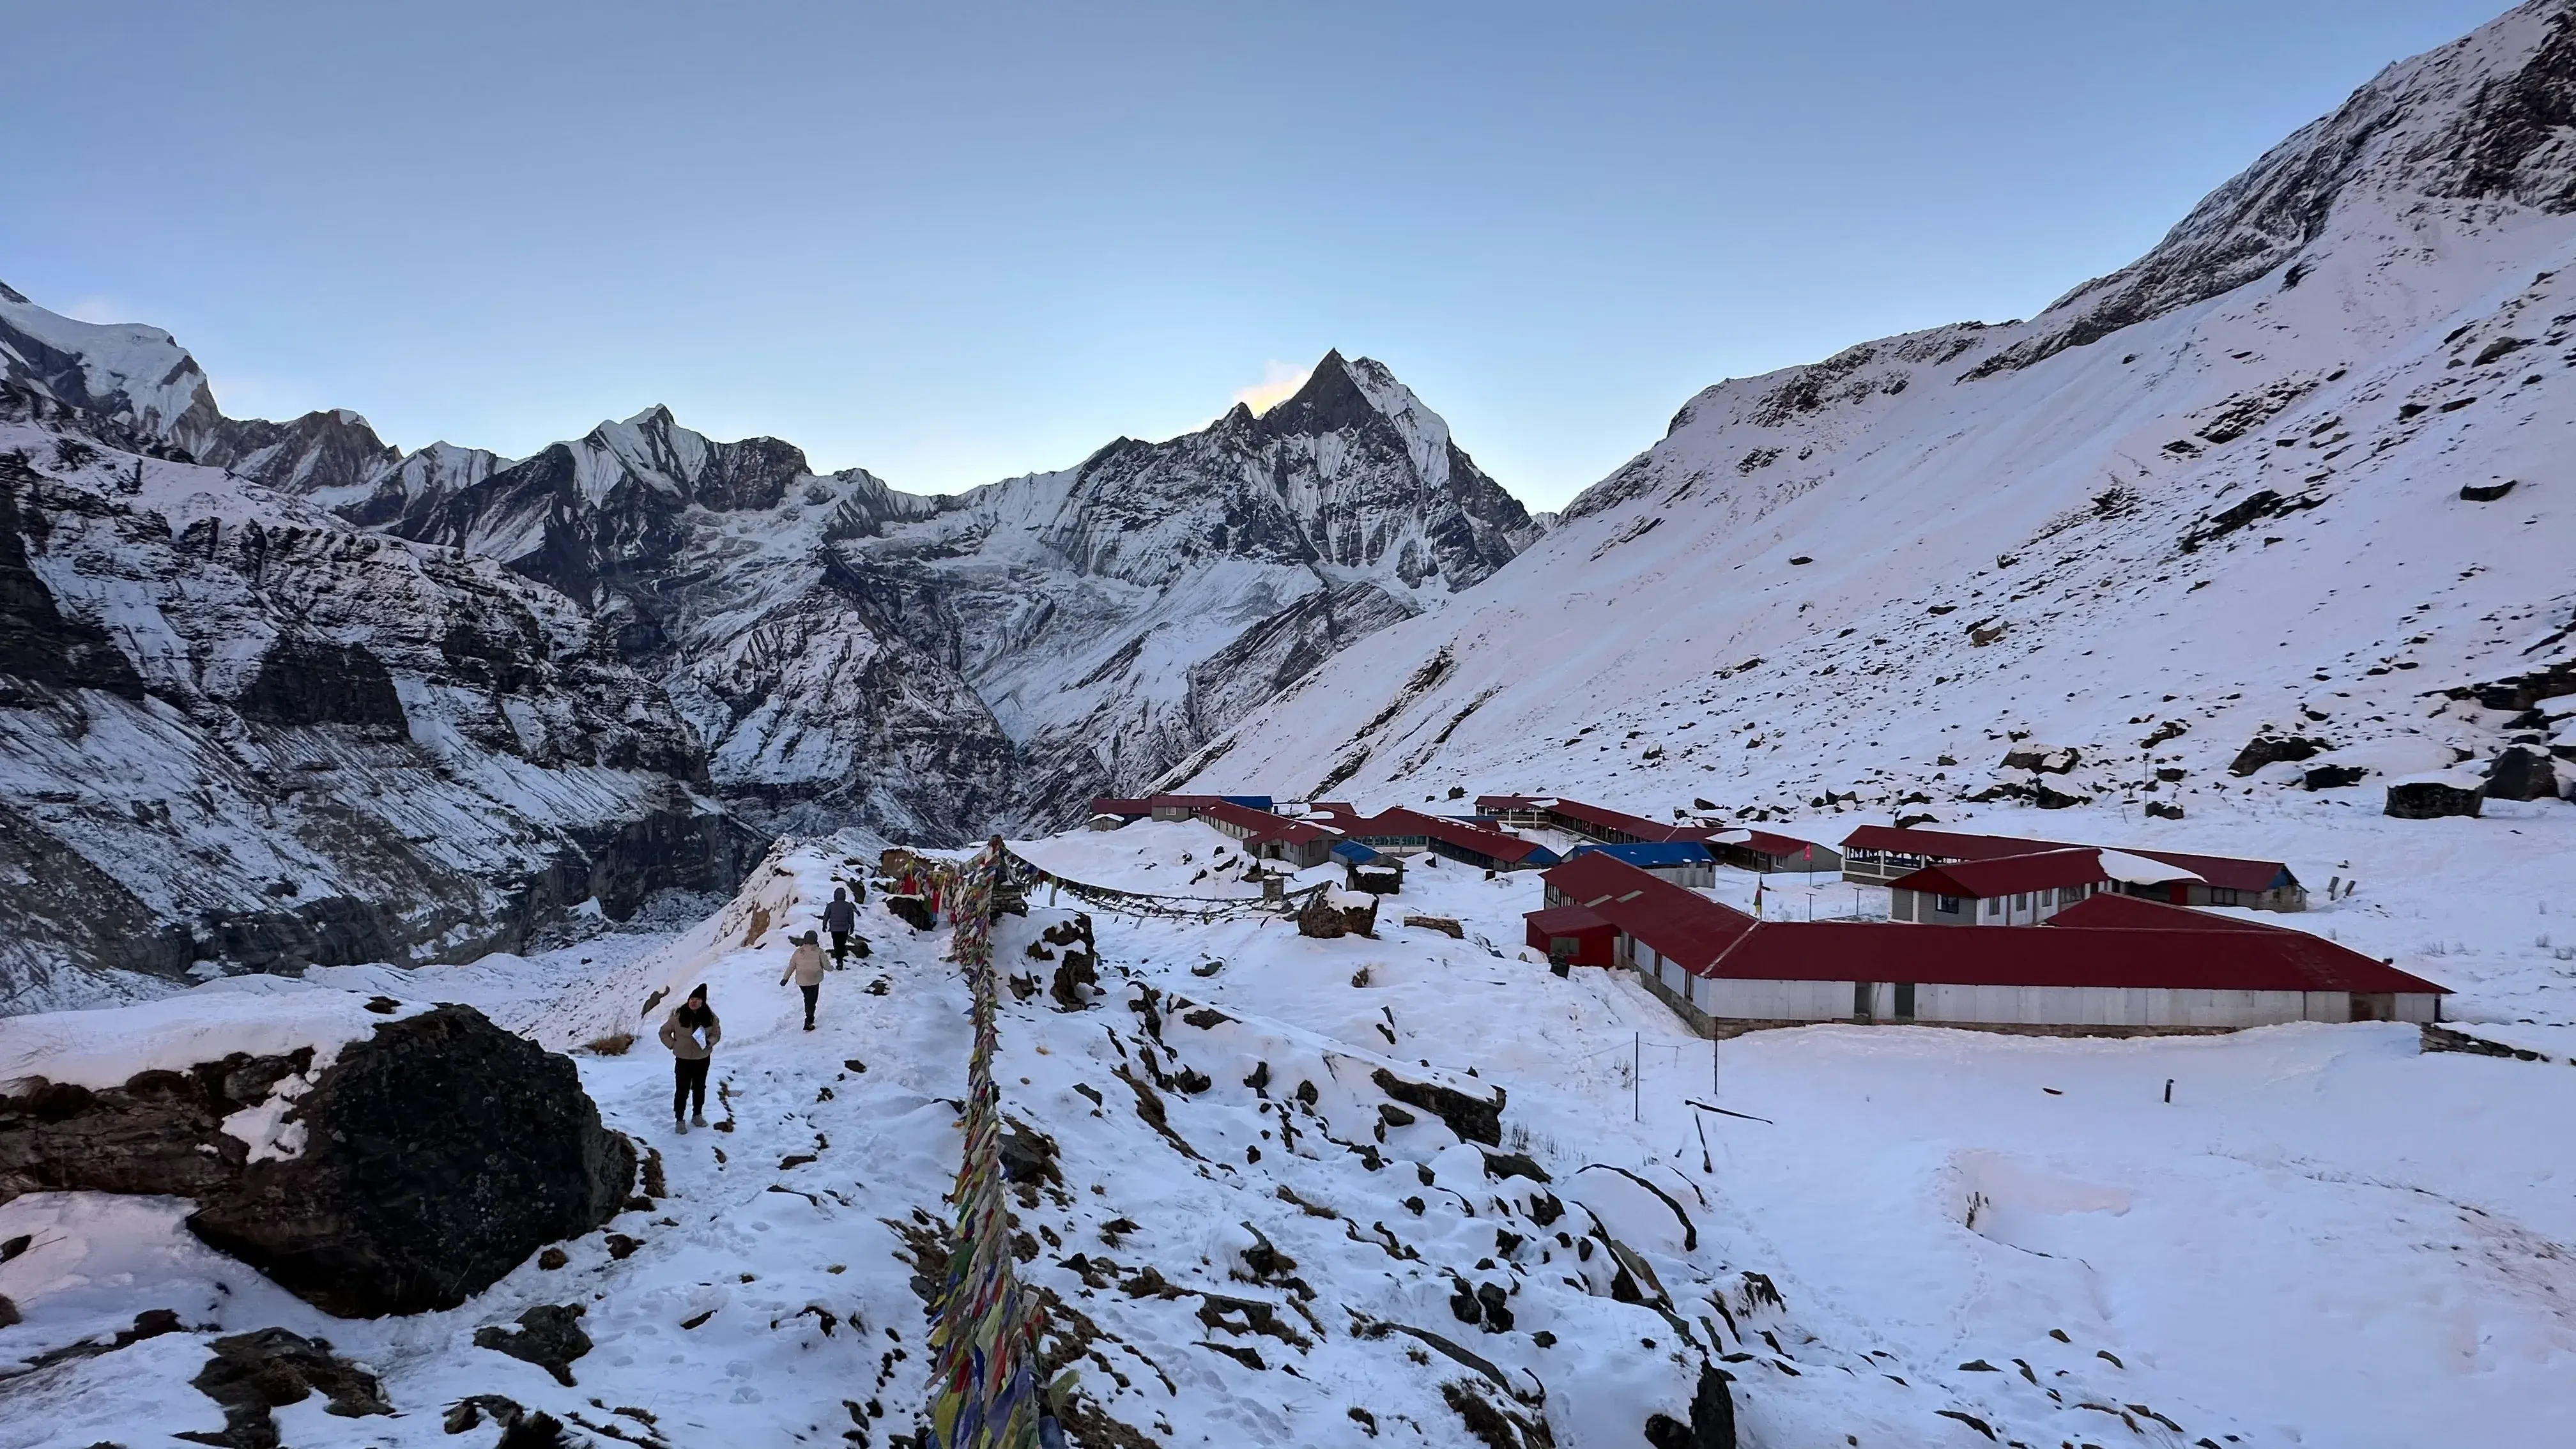 Breathtaking Fishtail peak dominates the view during a 7-day Annapurna Base Camp trek in Nepal. Cozy base camp lodge with iconic red roof awaits.